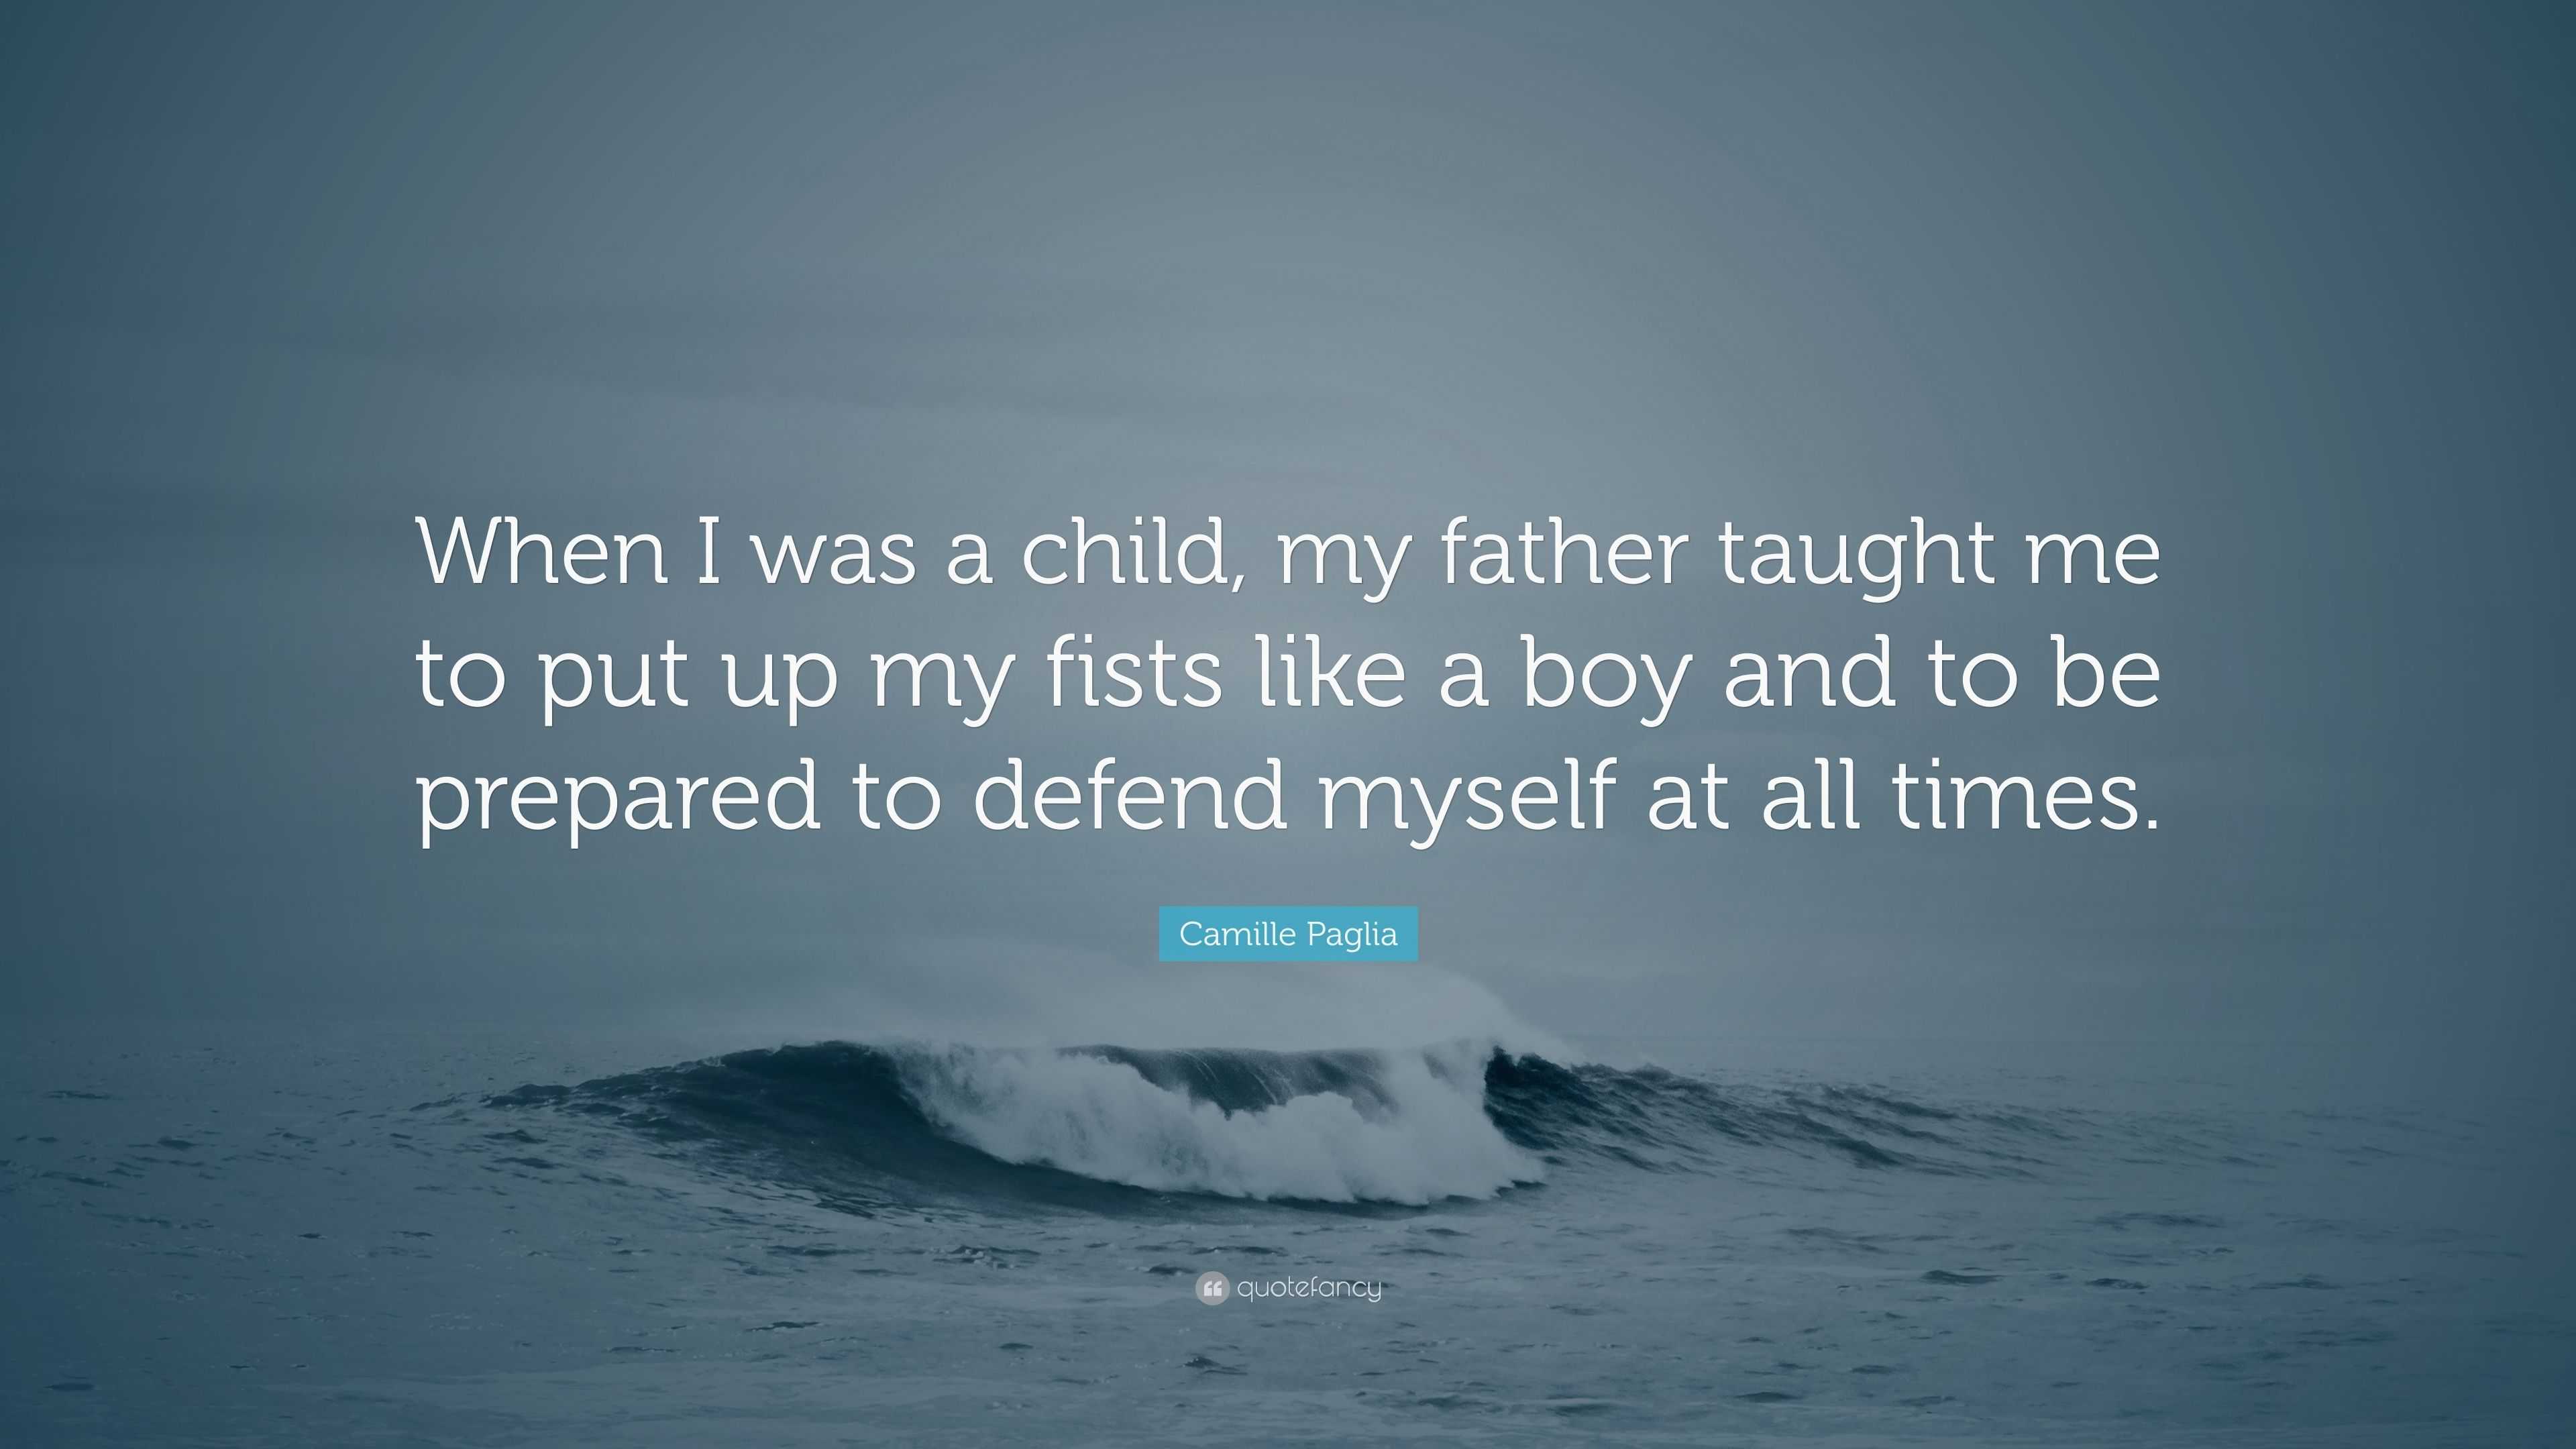 https://quotefancy.com/media/wallpaper/3840x2160/5247156-Camille-Paglia-Quote-When-I-was-a-child-my-father-taught-me-to-put.jpg